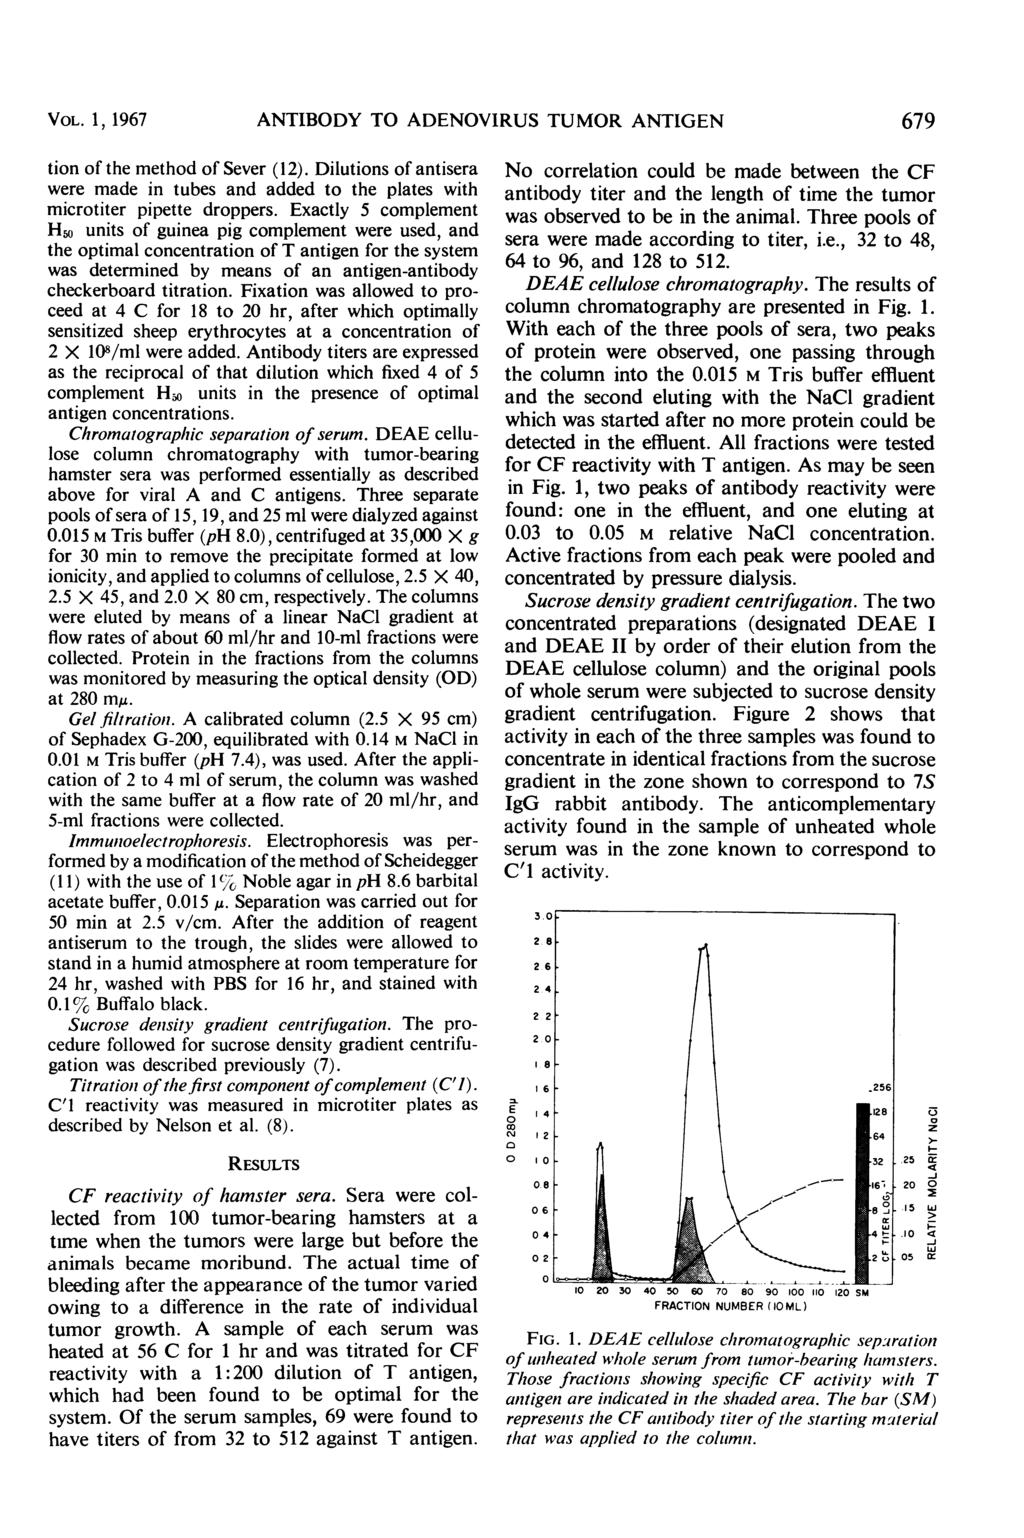 VOL. 1, 1967 ANTIBODY TO ADENOVIRUS TUMOR ANTIGEN 679 tion of the method of Sever (12). Dilutions of antisera were made in tubes and added to the plates with microtiter pipette droppers.